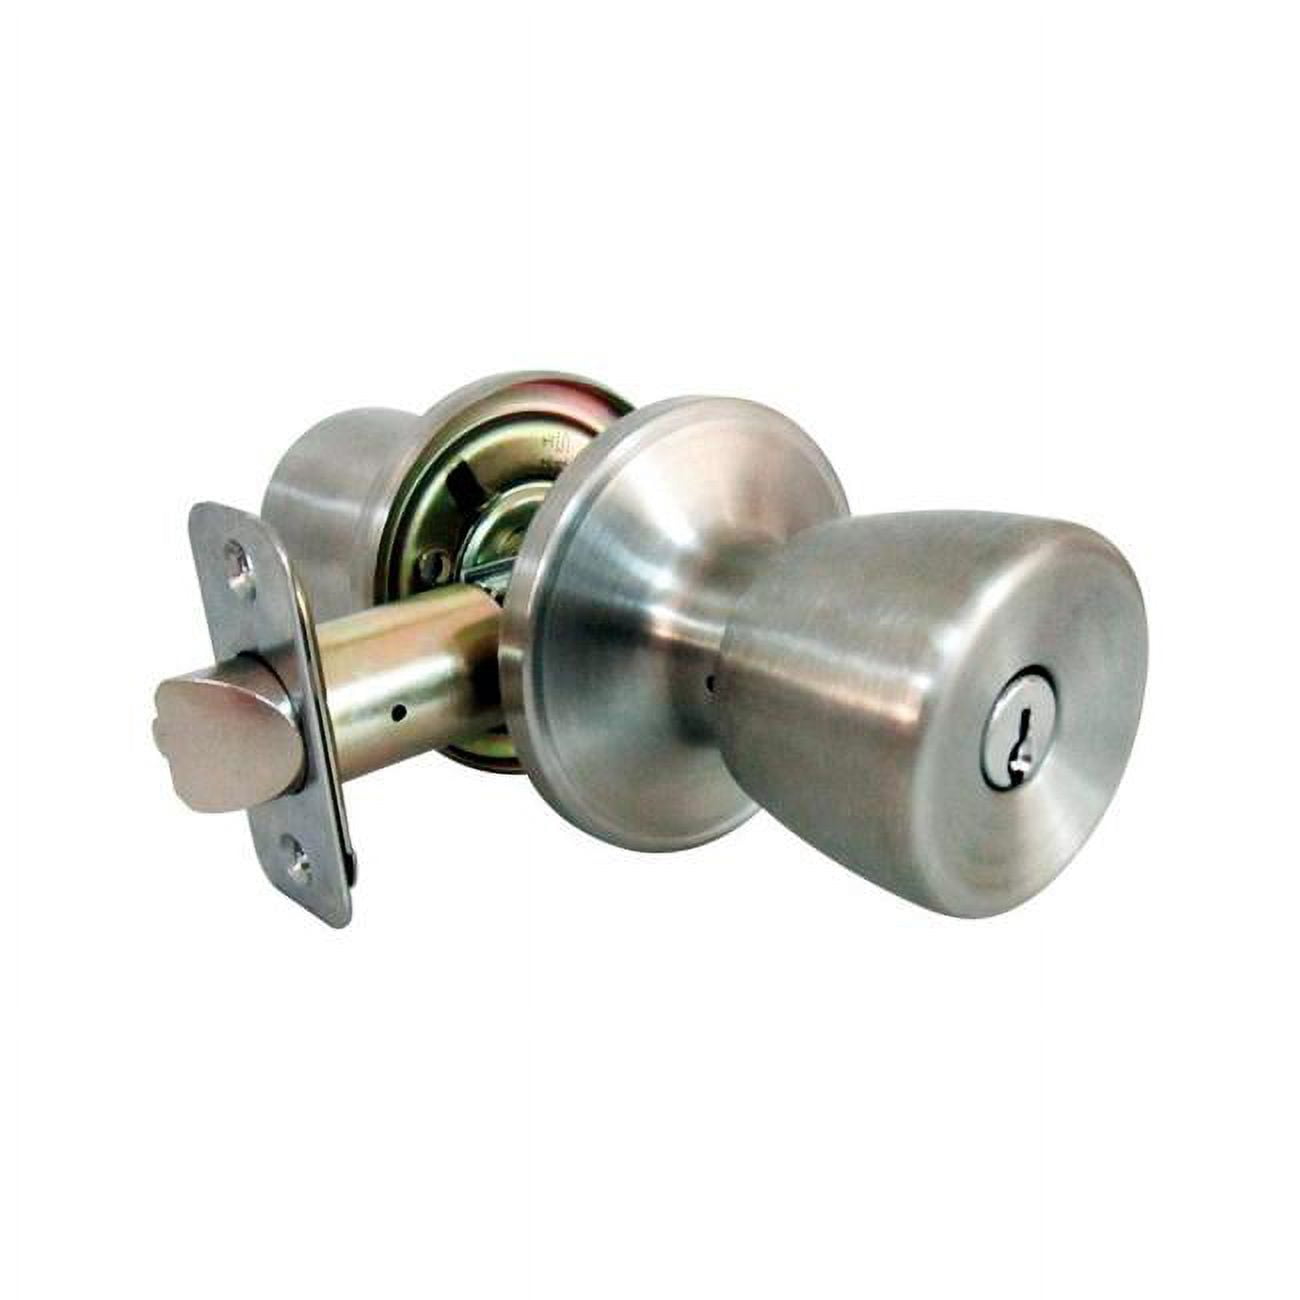 5002055 Tulip Satin Stainless Steel Metal Entry Knob - S 3 Grade Right Handed